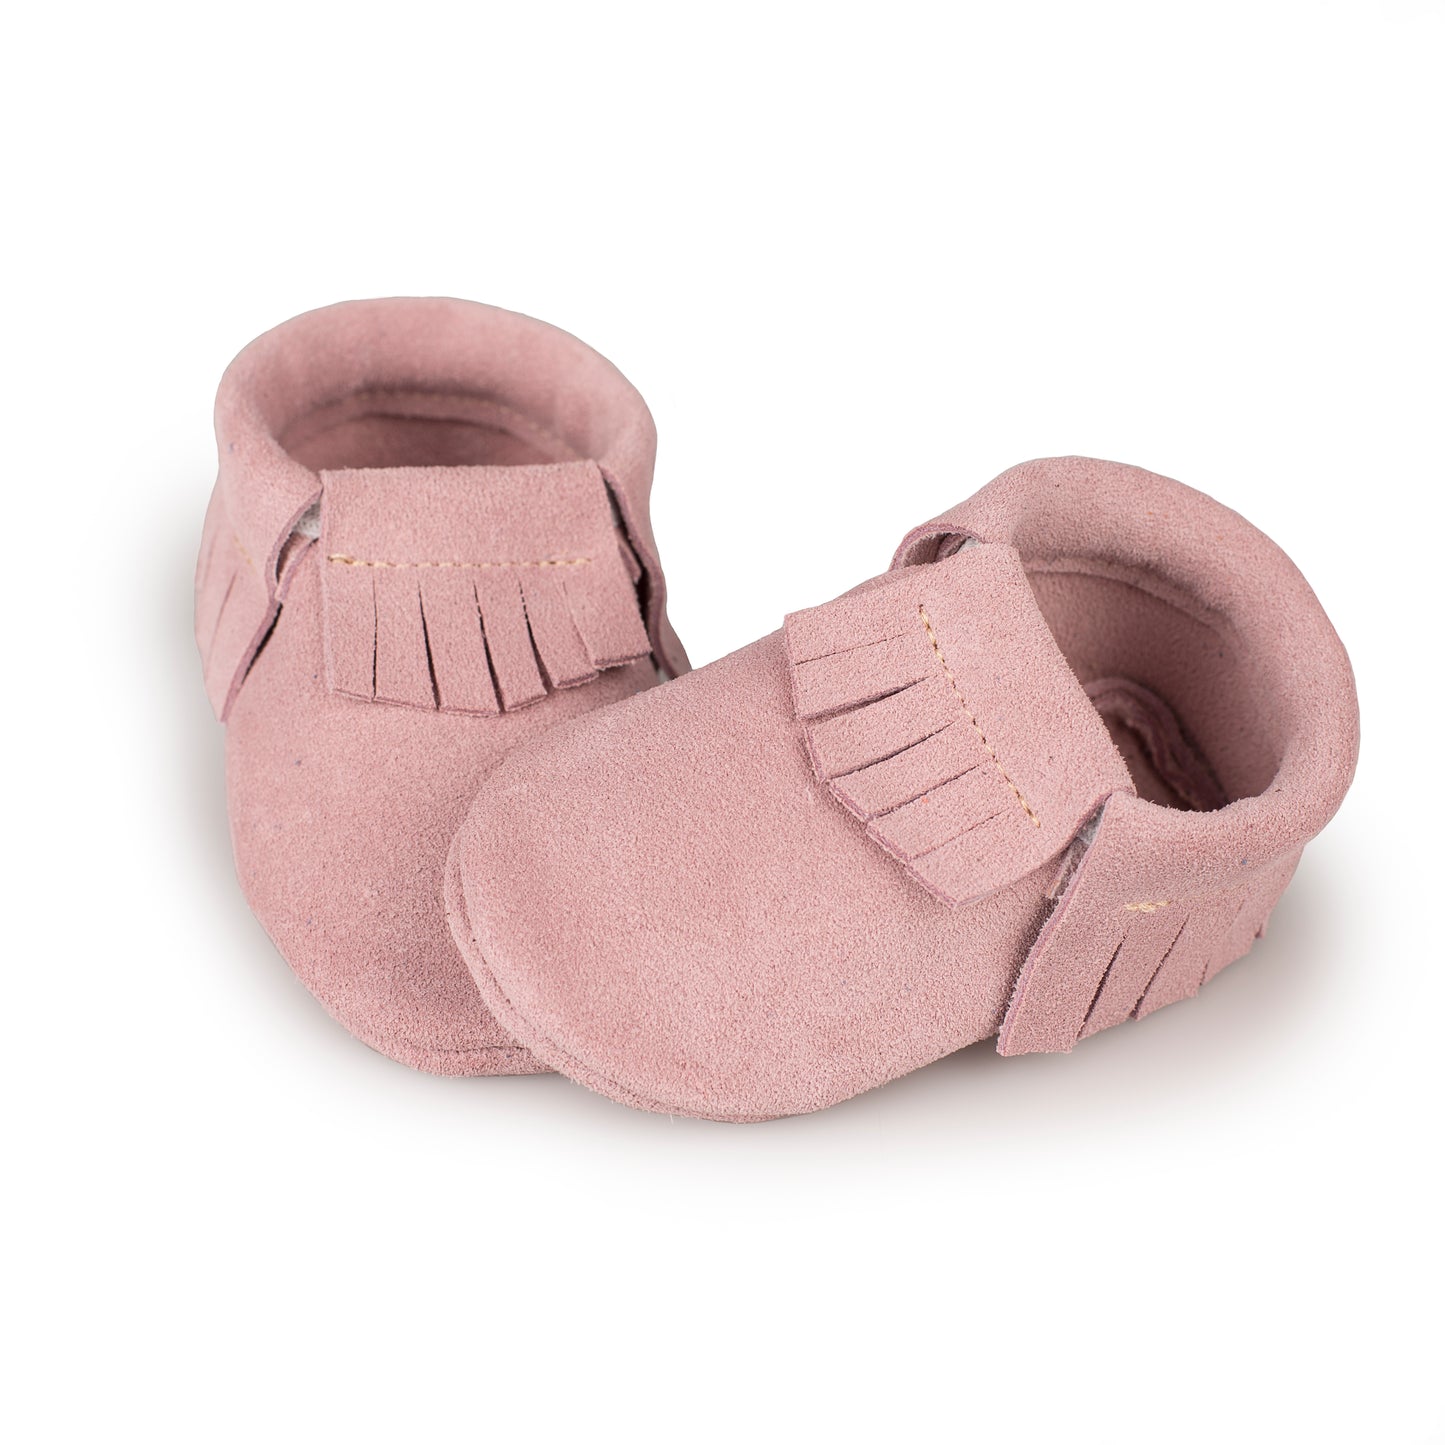 Suede fringe baby shoes